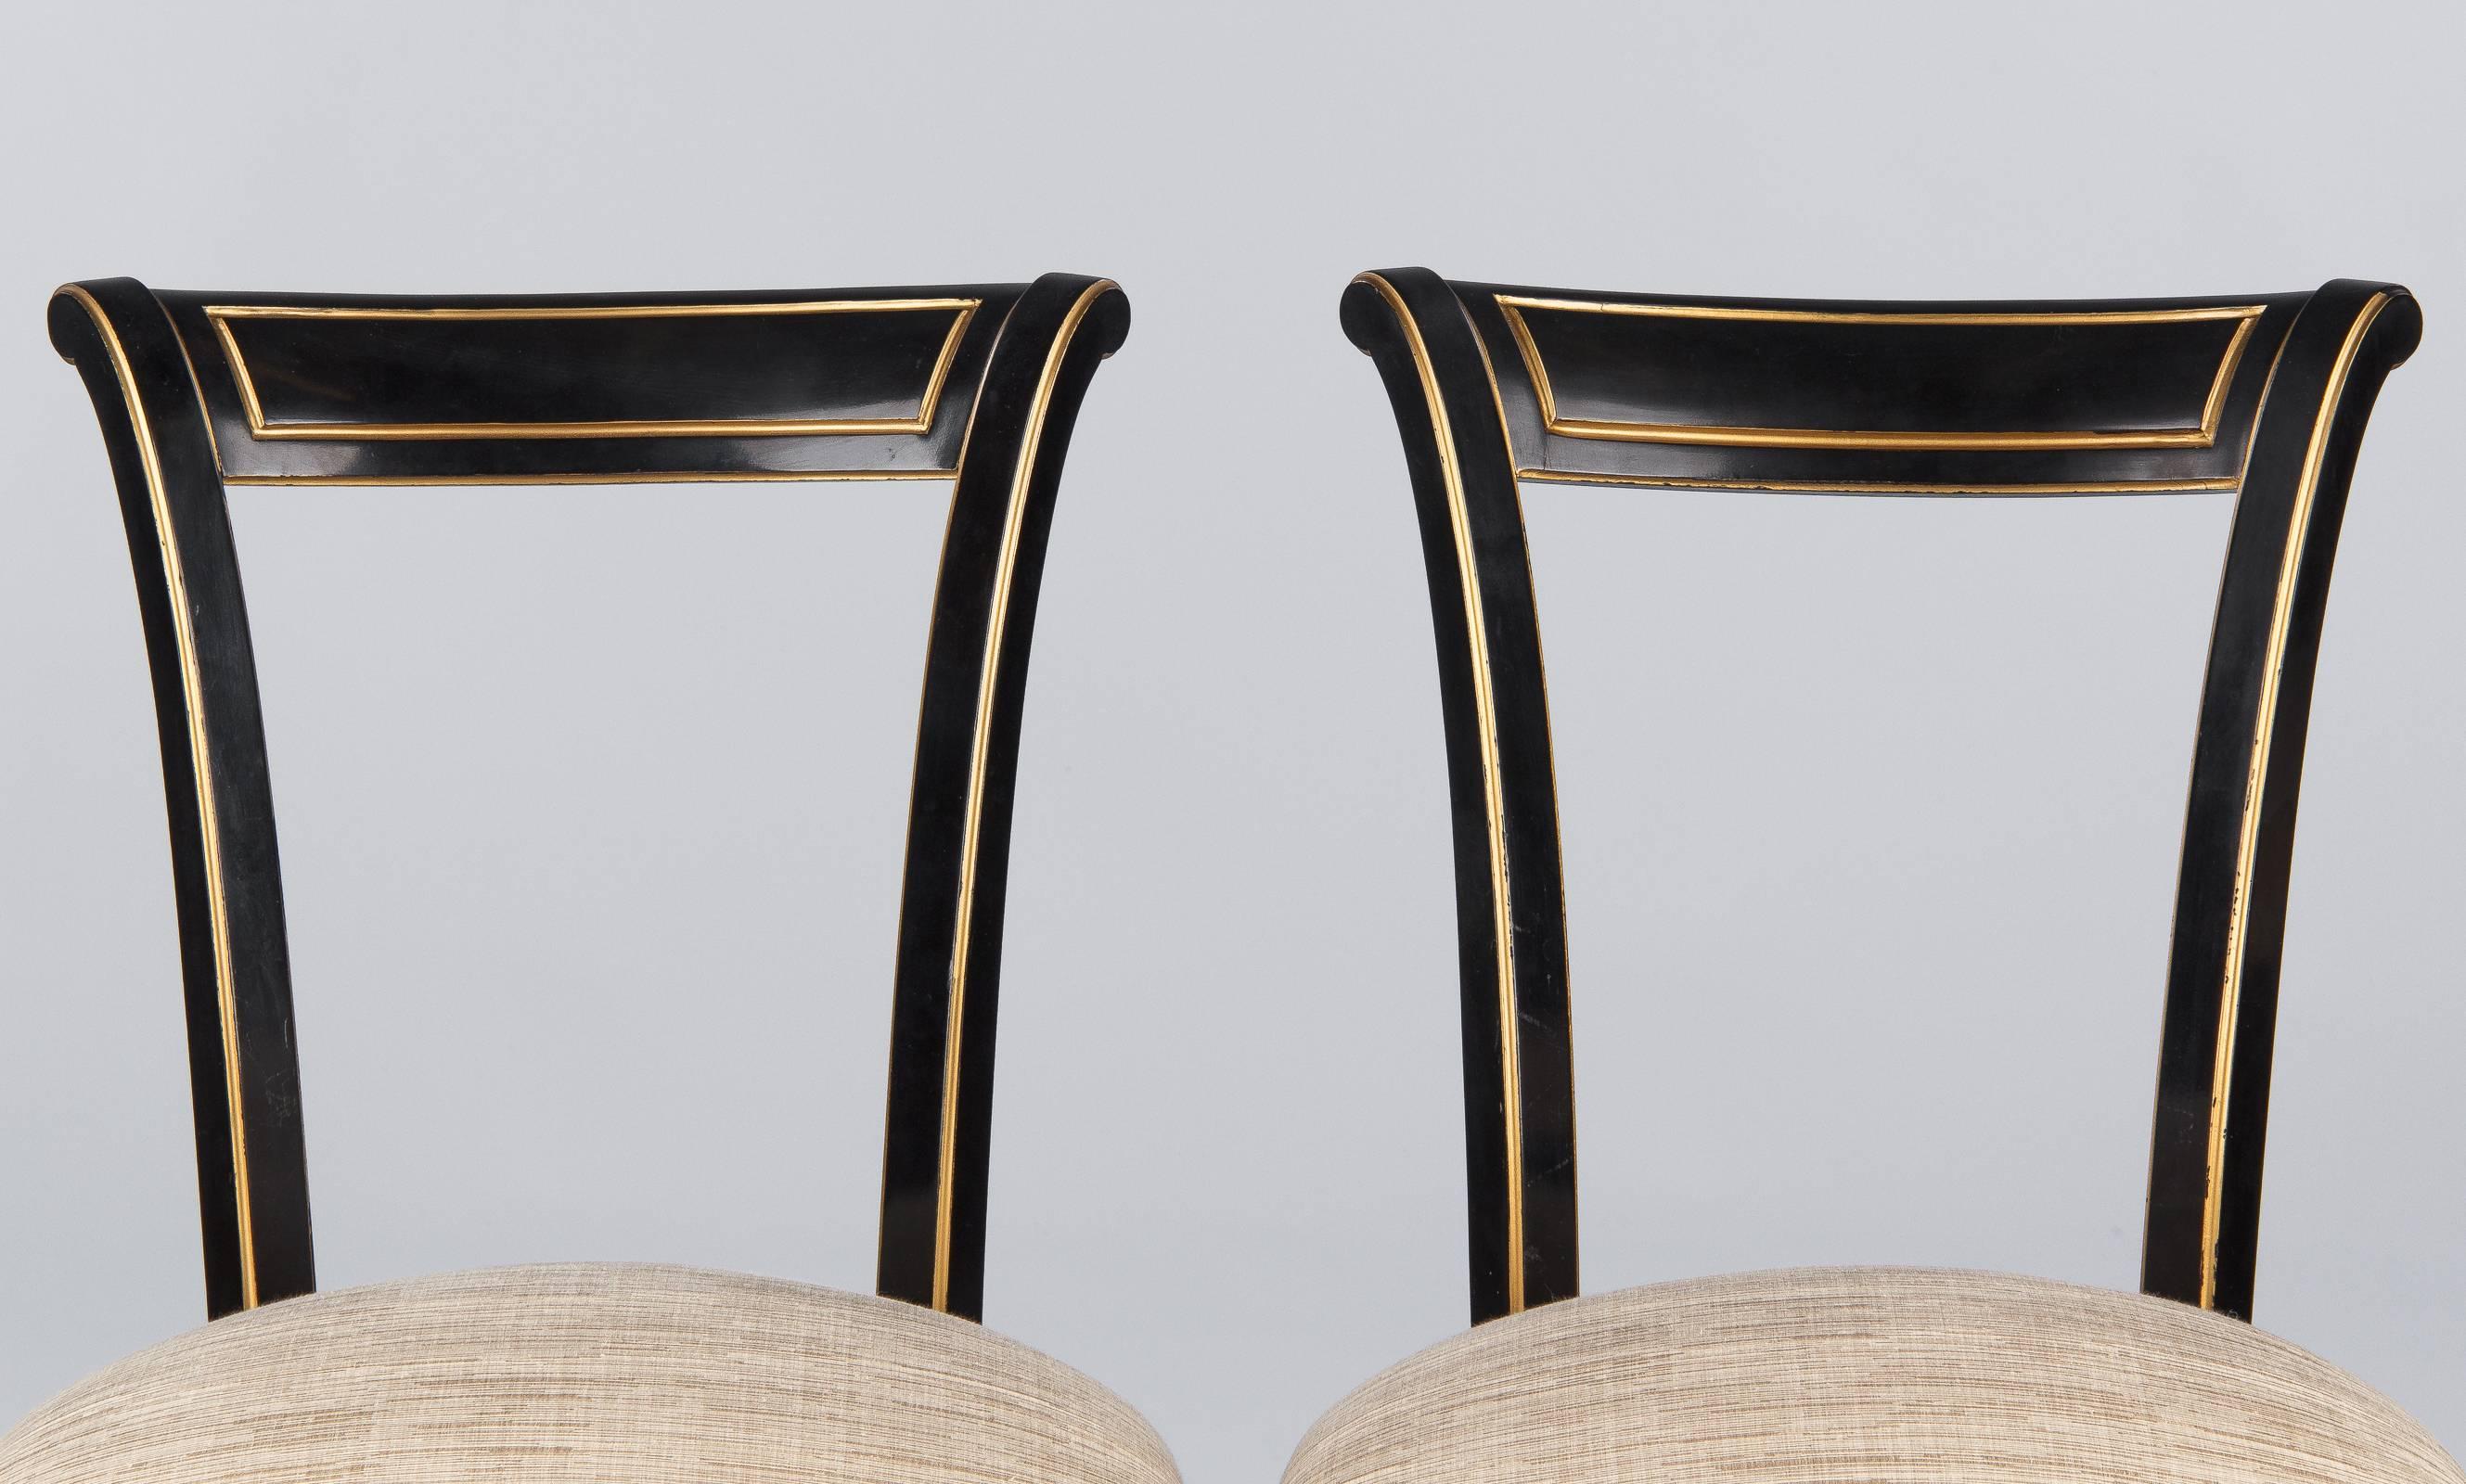 Varnished Set of Four French Neoclassical Ebonized Chairs by Maurice Hirsch, 1950s